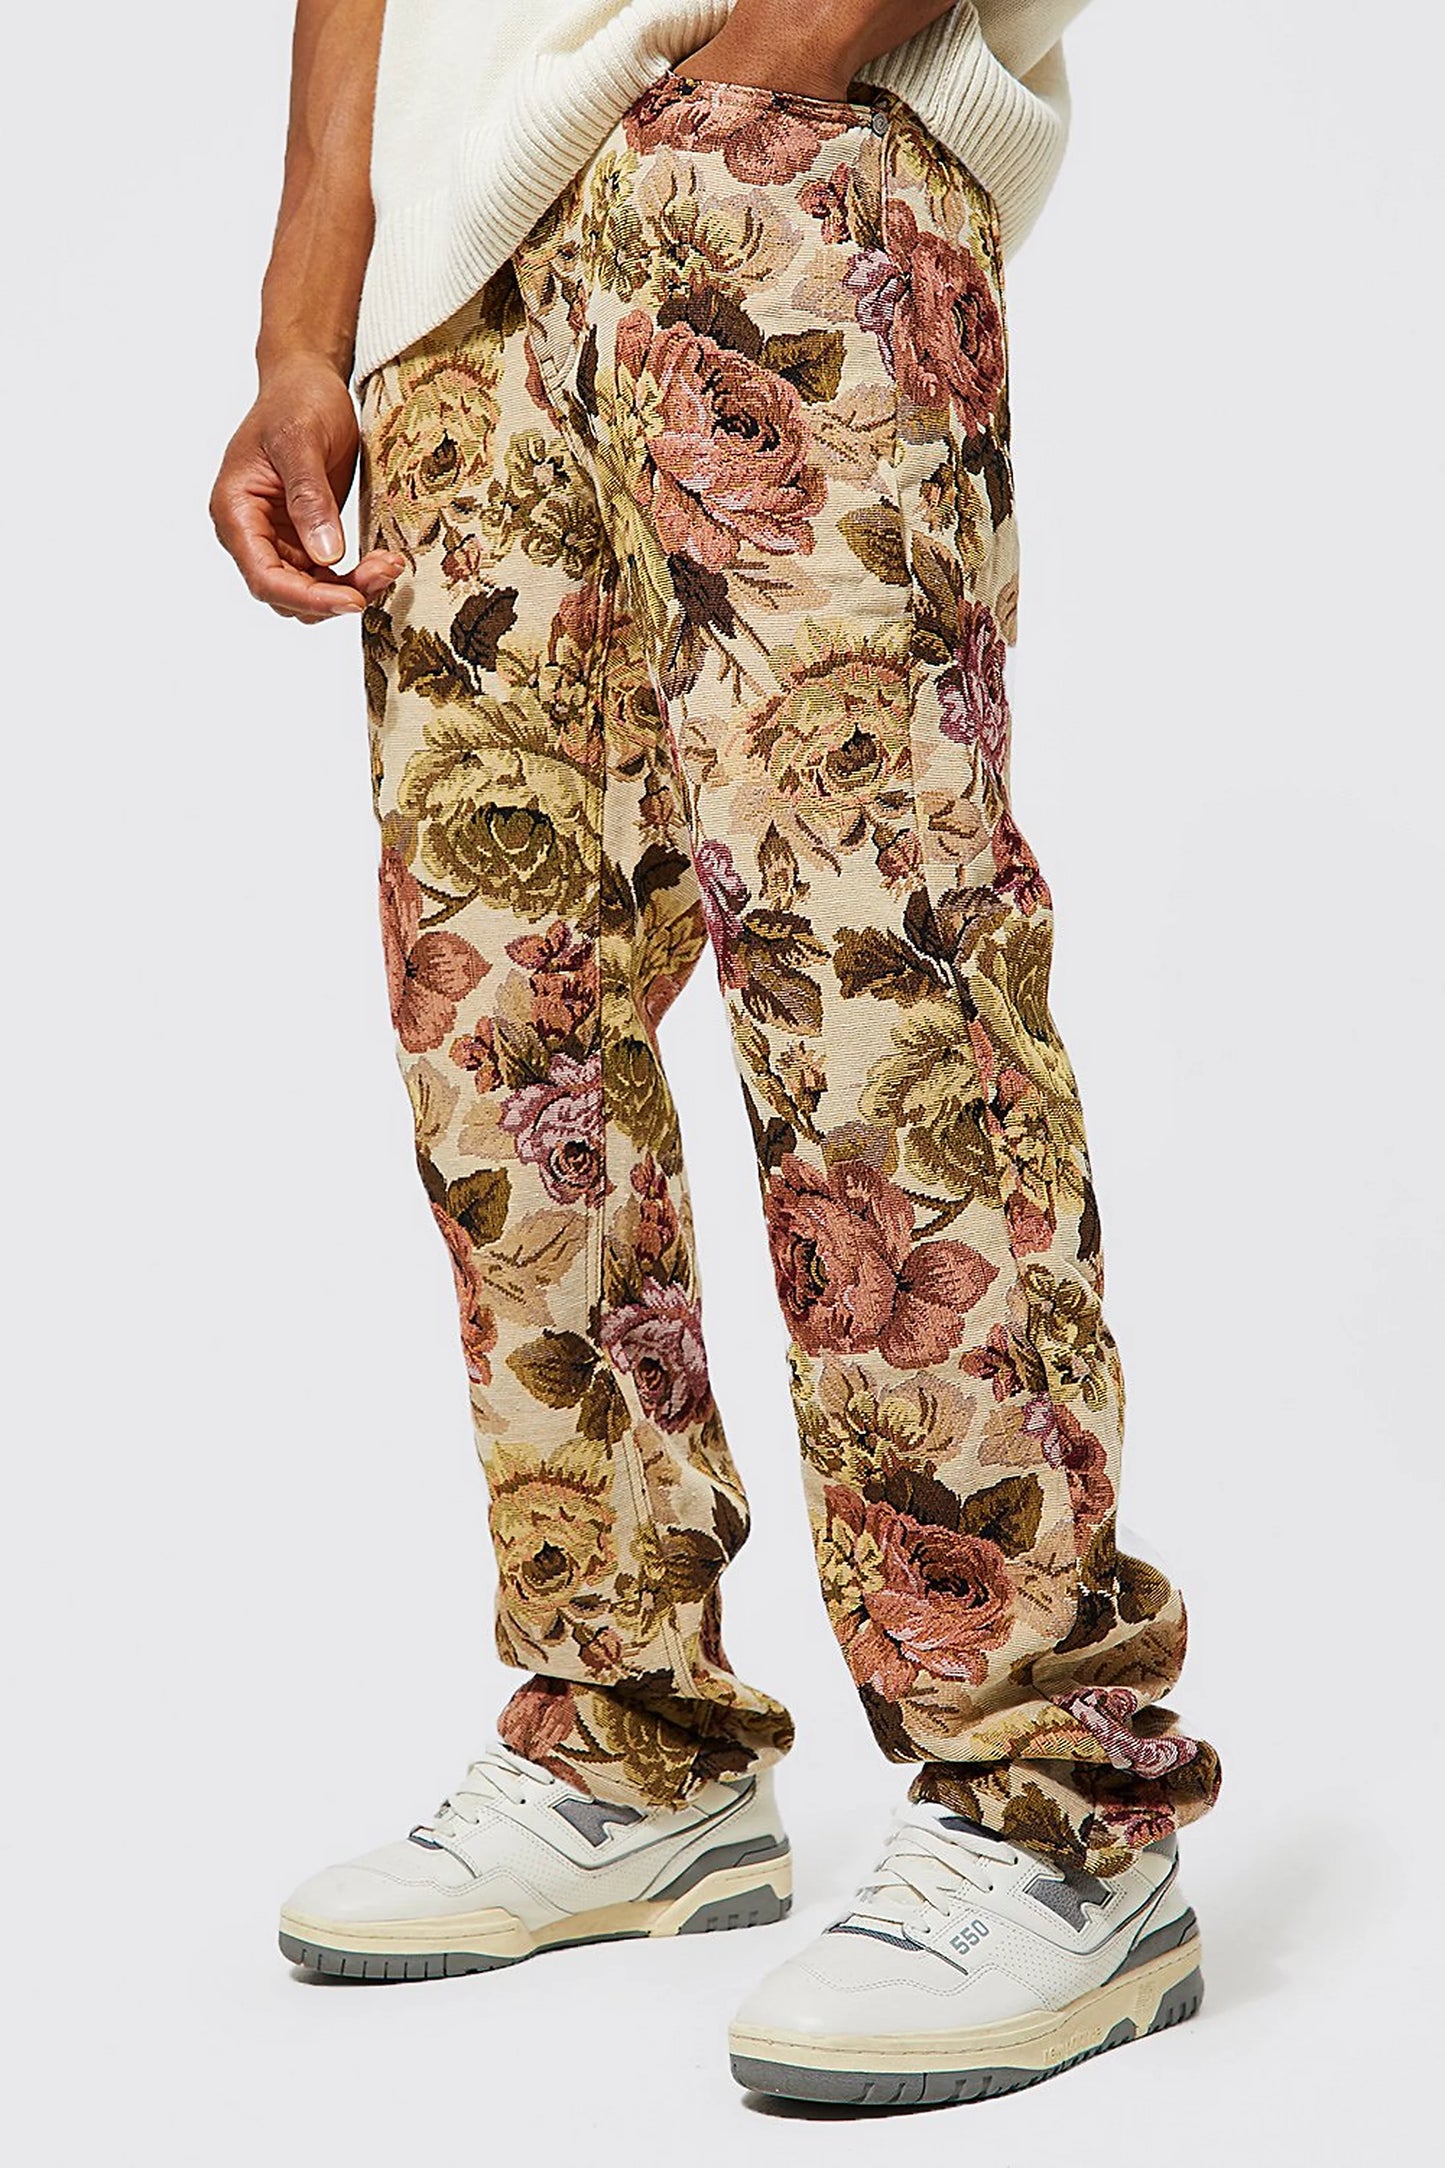 BOOHOOMAN RELAXED FIT FLORAL TAPESTRY JEANS